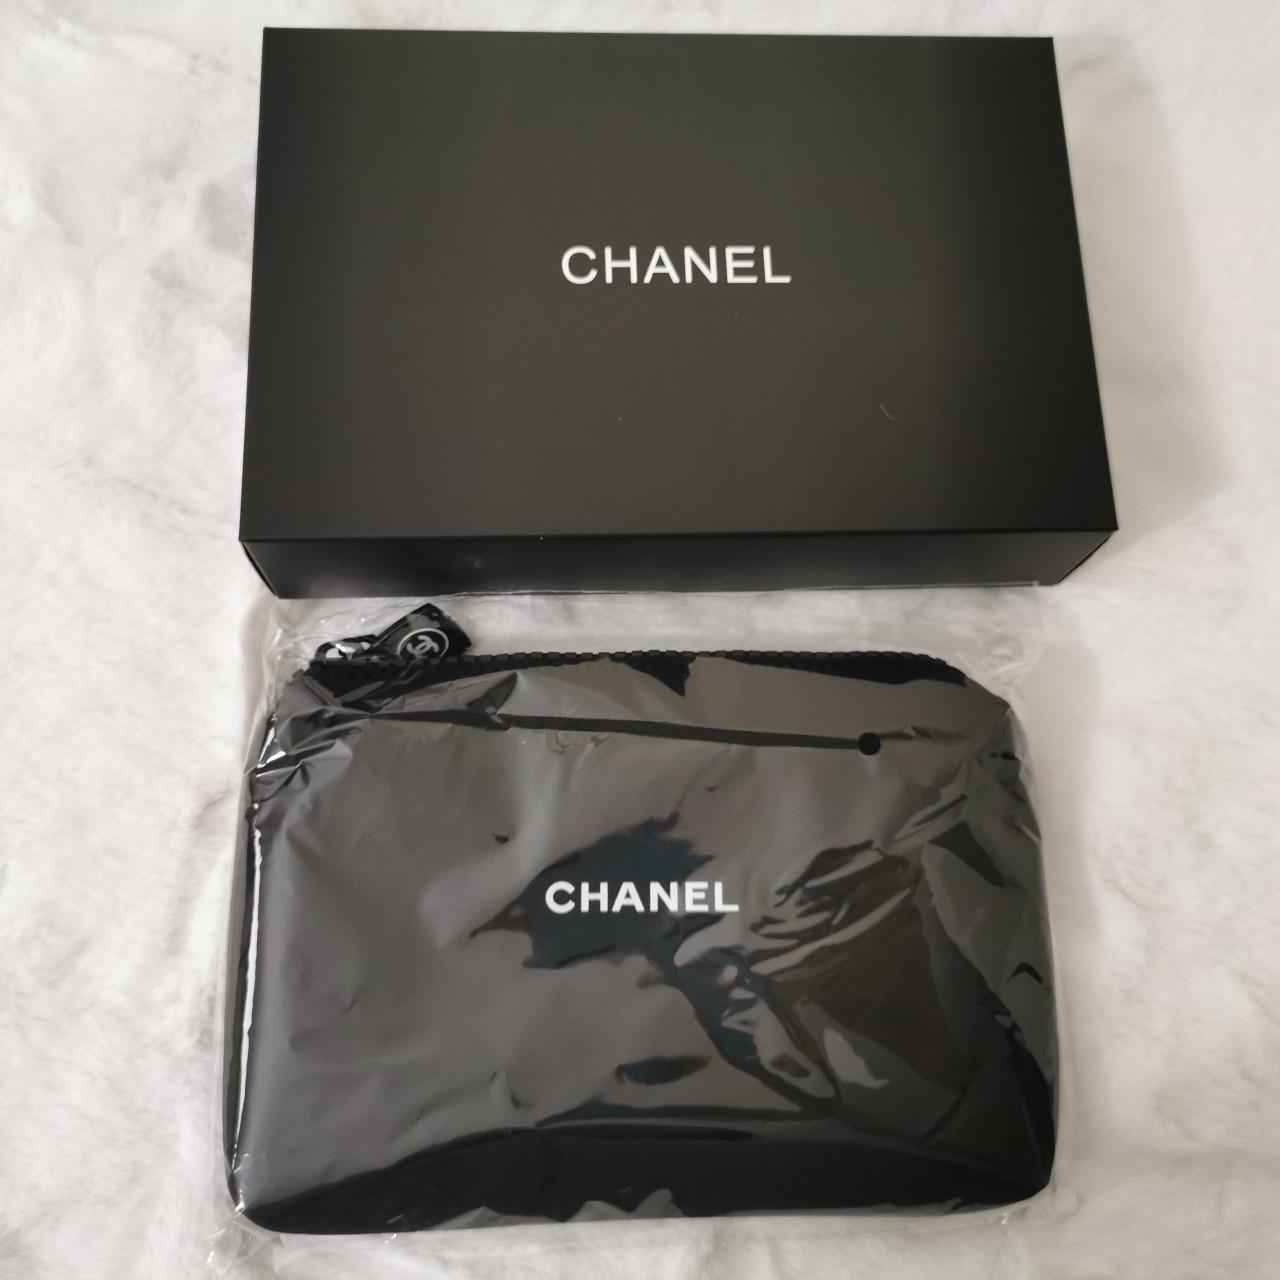 Chanel Makeup VIP Gift Bag Can be worn on the - Depop